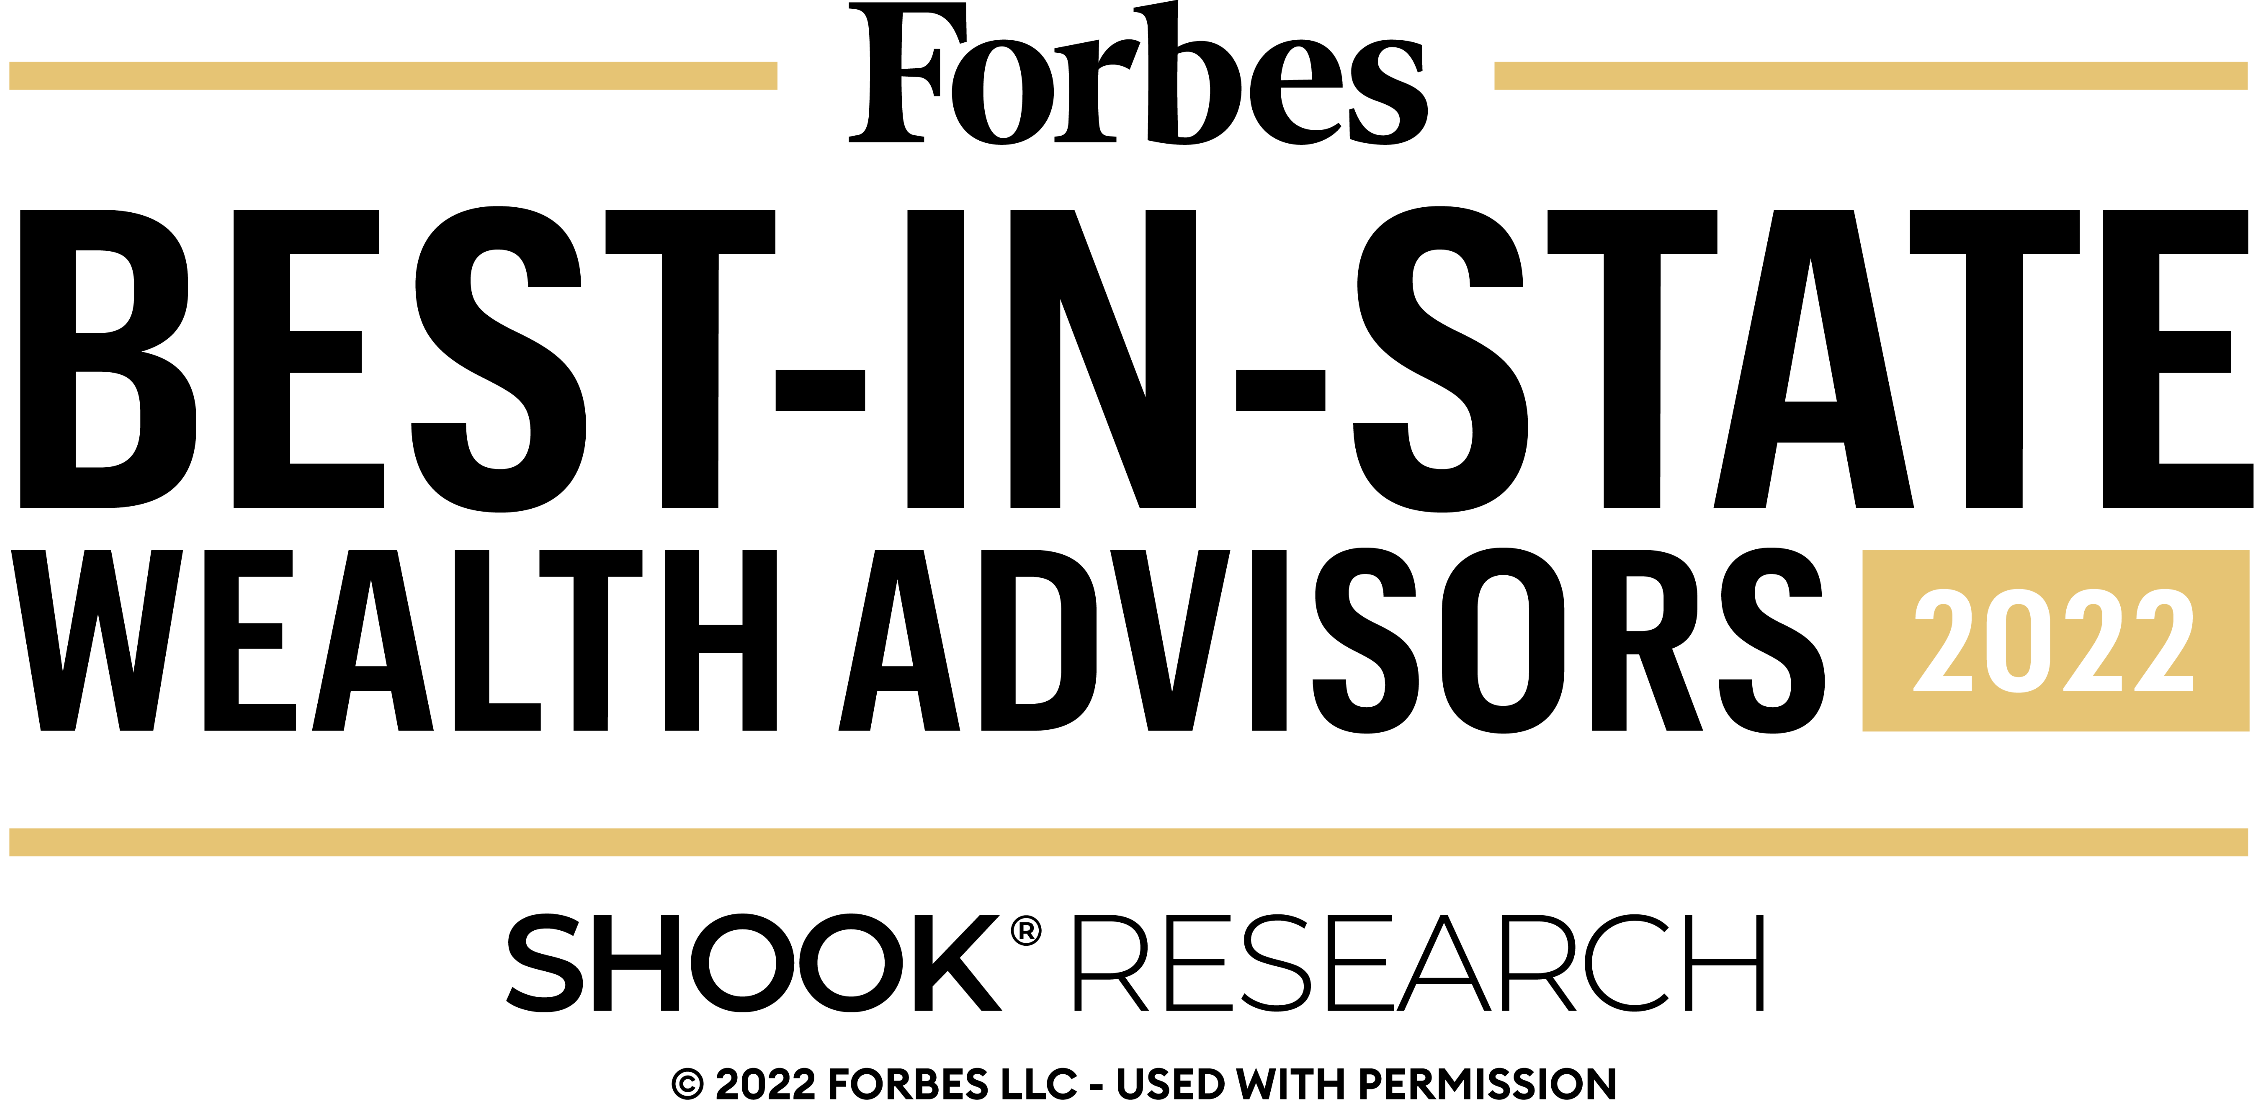 Forbes Best in state wealth advisors 2022 Shook Research